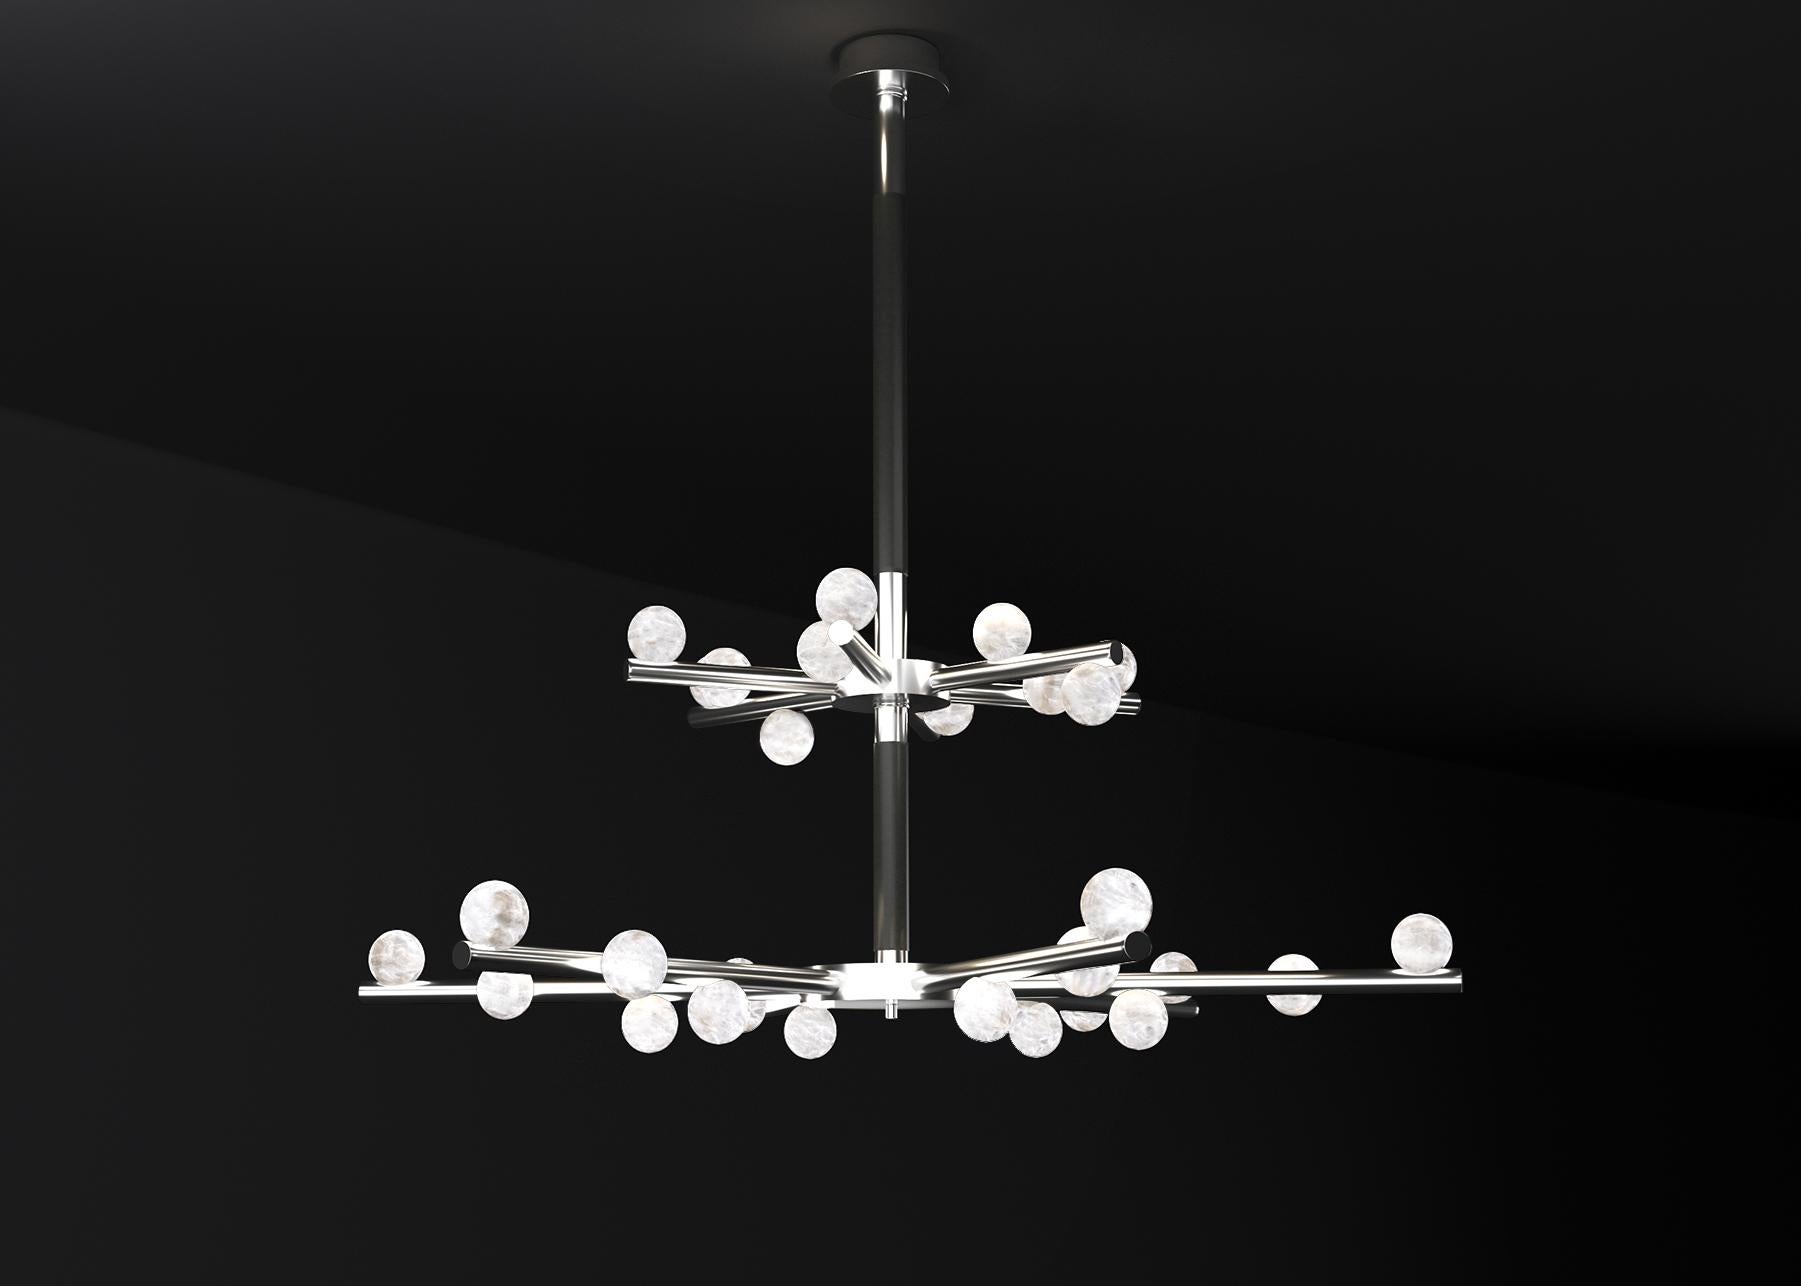 Demetra Shiny Silver Metal Double Chandelier by Alabastro Italiano
Dimensions: D 85 x W 97 x H 96 cm.
Materials: White alabaster, shiny silver metal and leather.

Available in different finishes: Shiny Silver, Bronze, Brushed Brass, Ruggine of